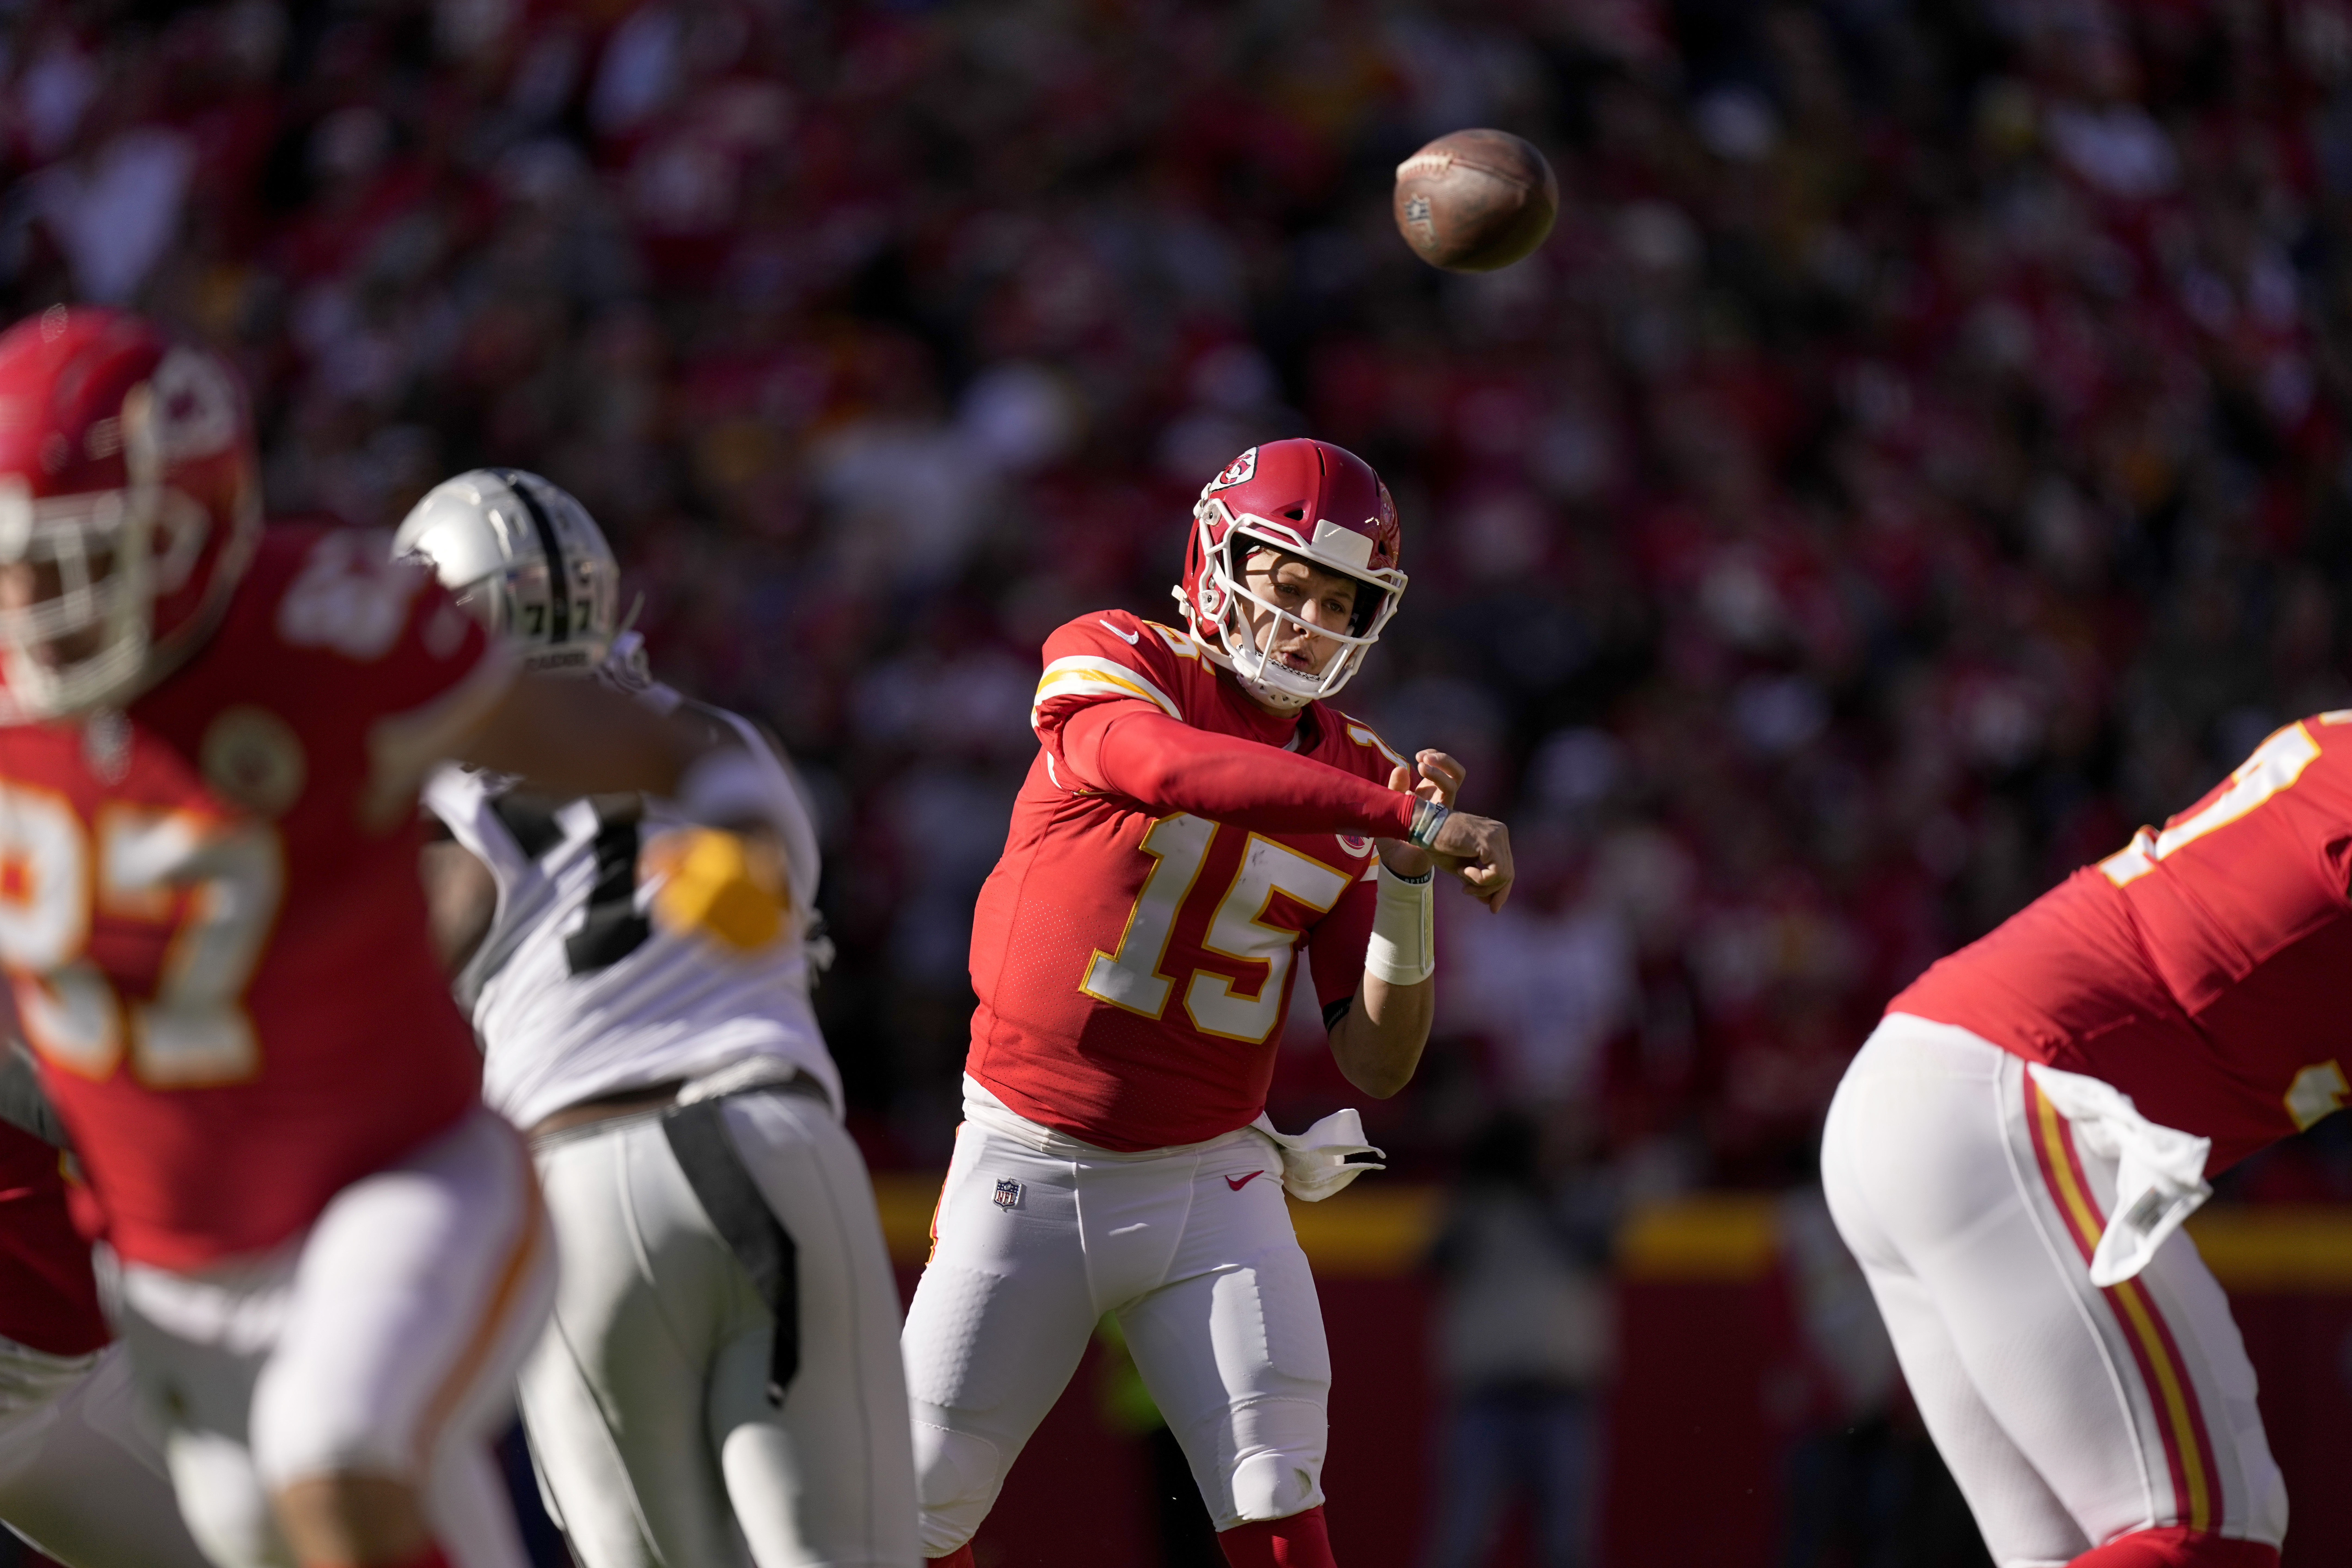 Raiders with 5 turnovers, get crushed by Chiefs 48-9